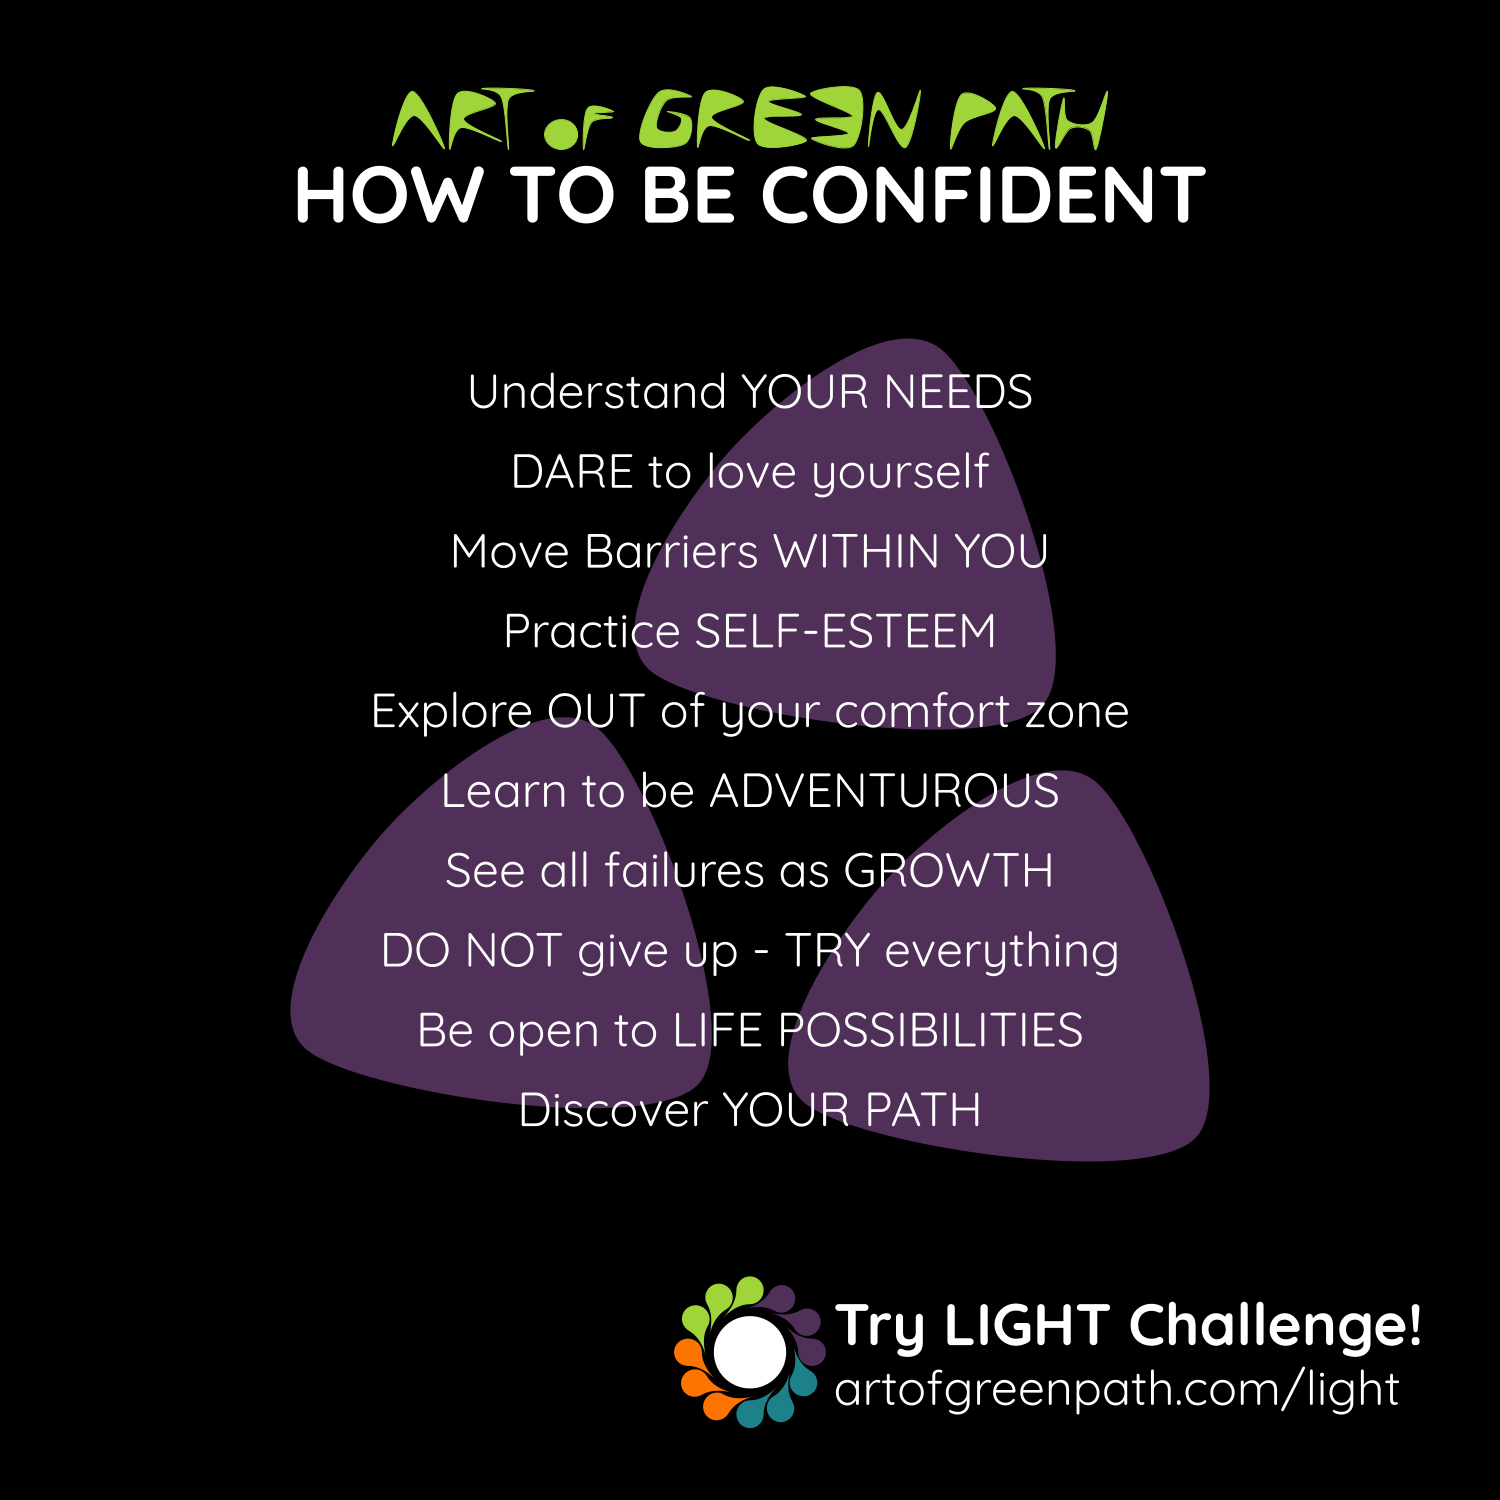 Art Of Green Path - Know Yourself - How To Be Confident